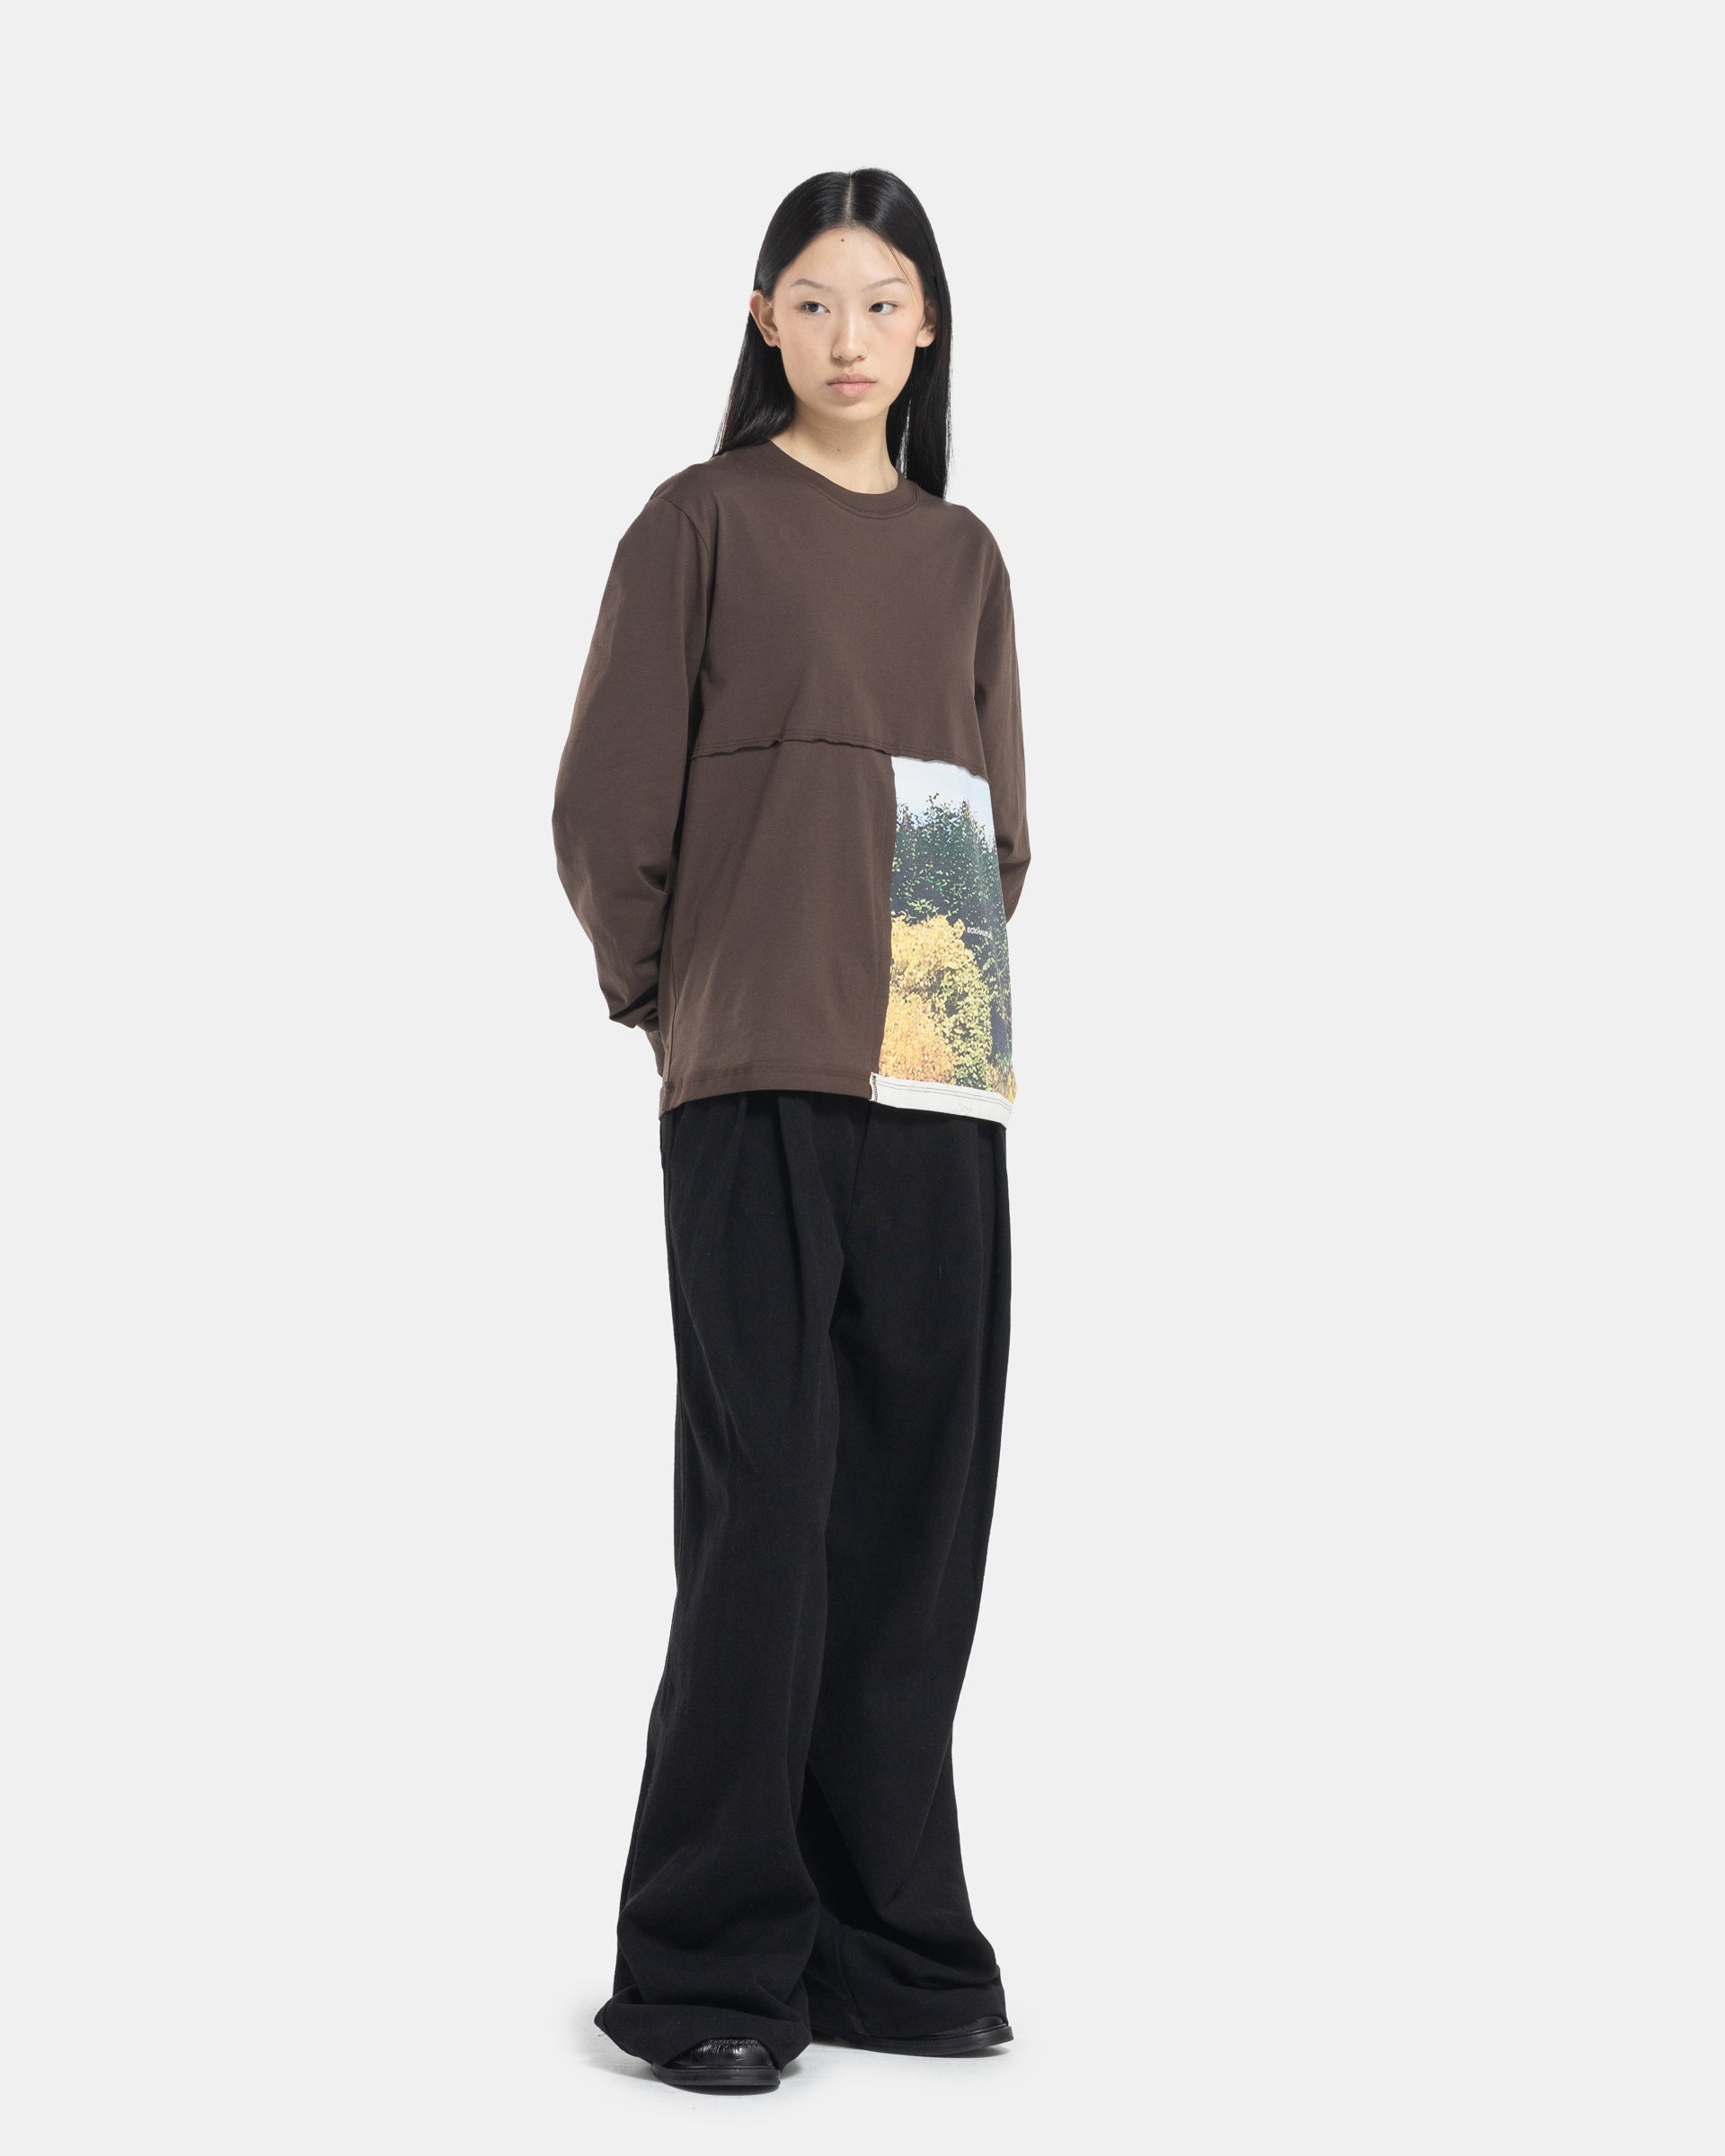 Female model wearing a brown Eckhaus Latta Lapped Longsleeve T-shirt with a printed design.